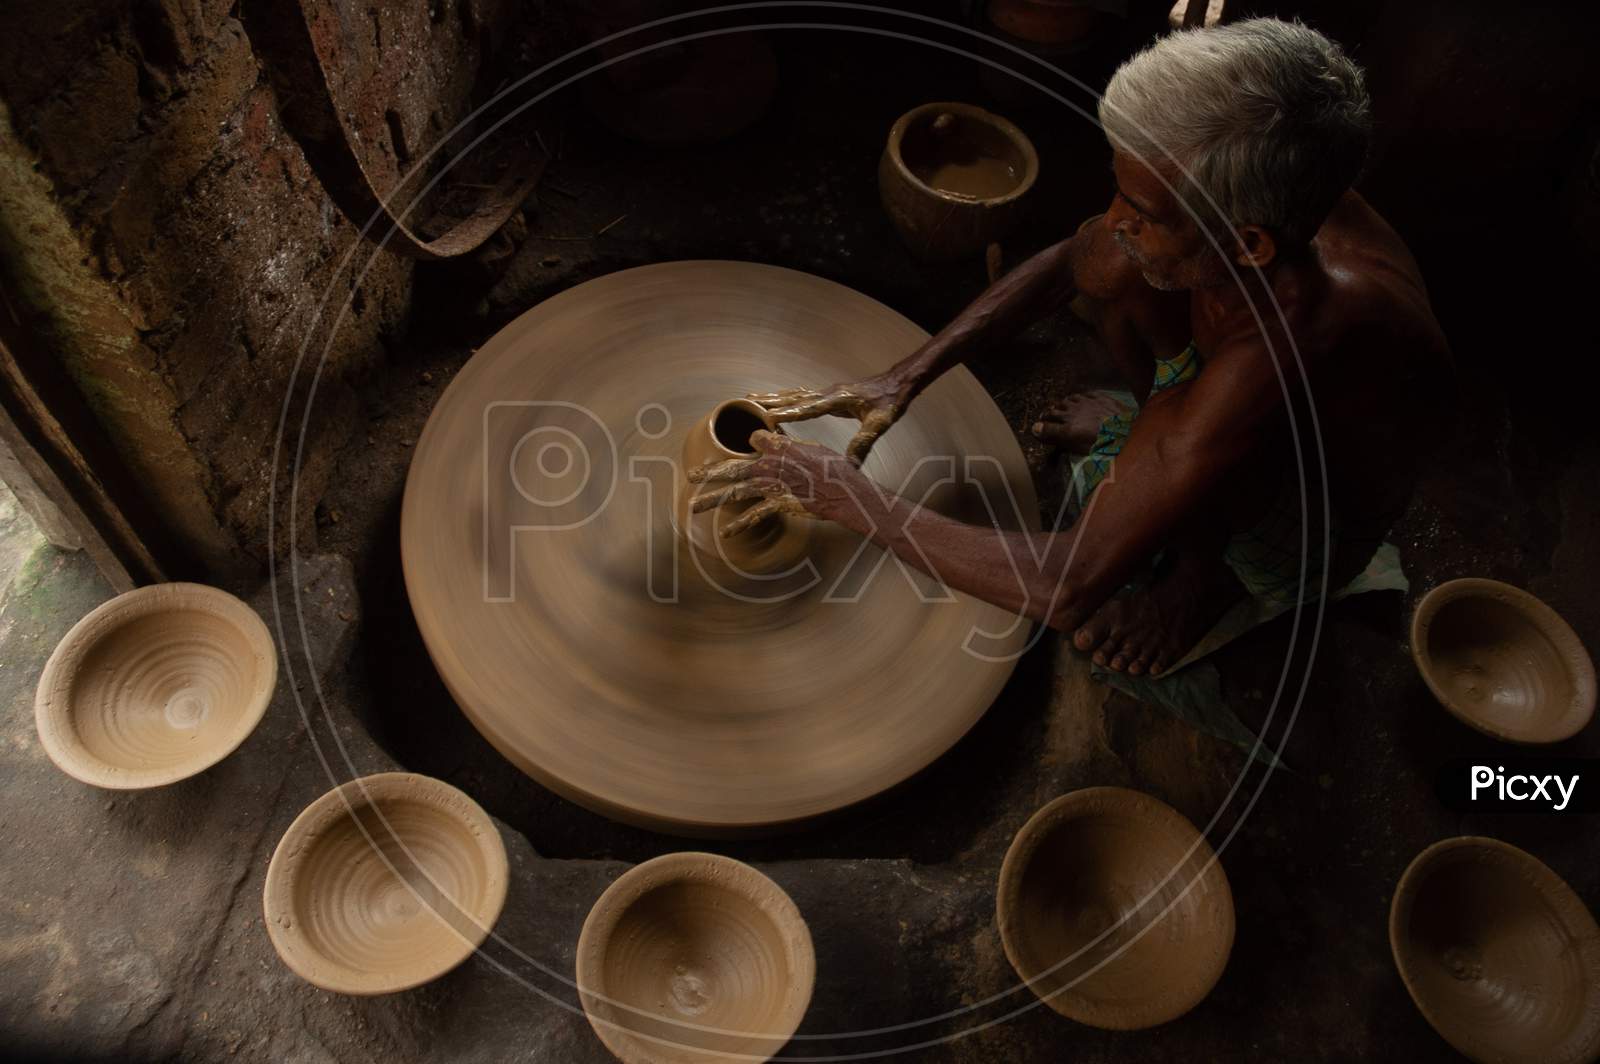 A Potter Making Clay Pots In an Rural Village